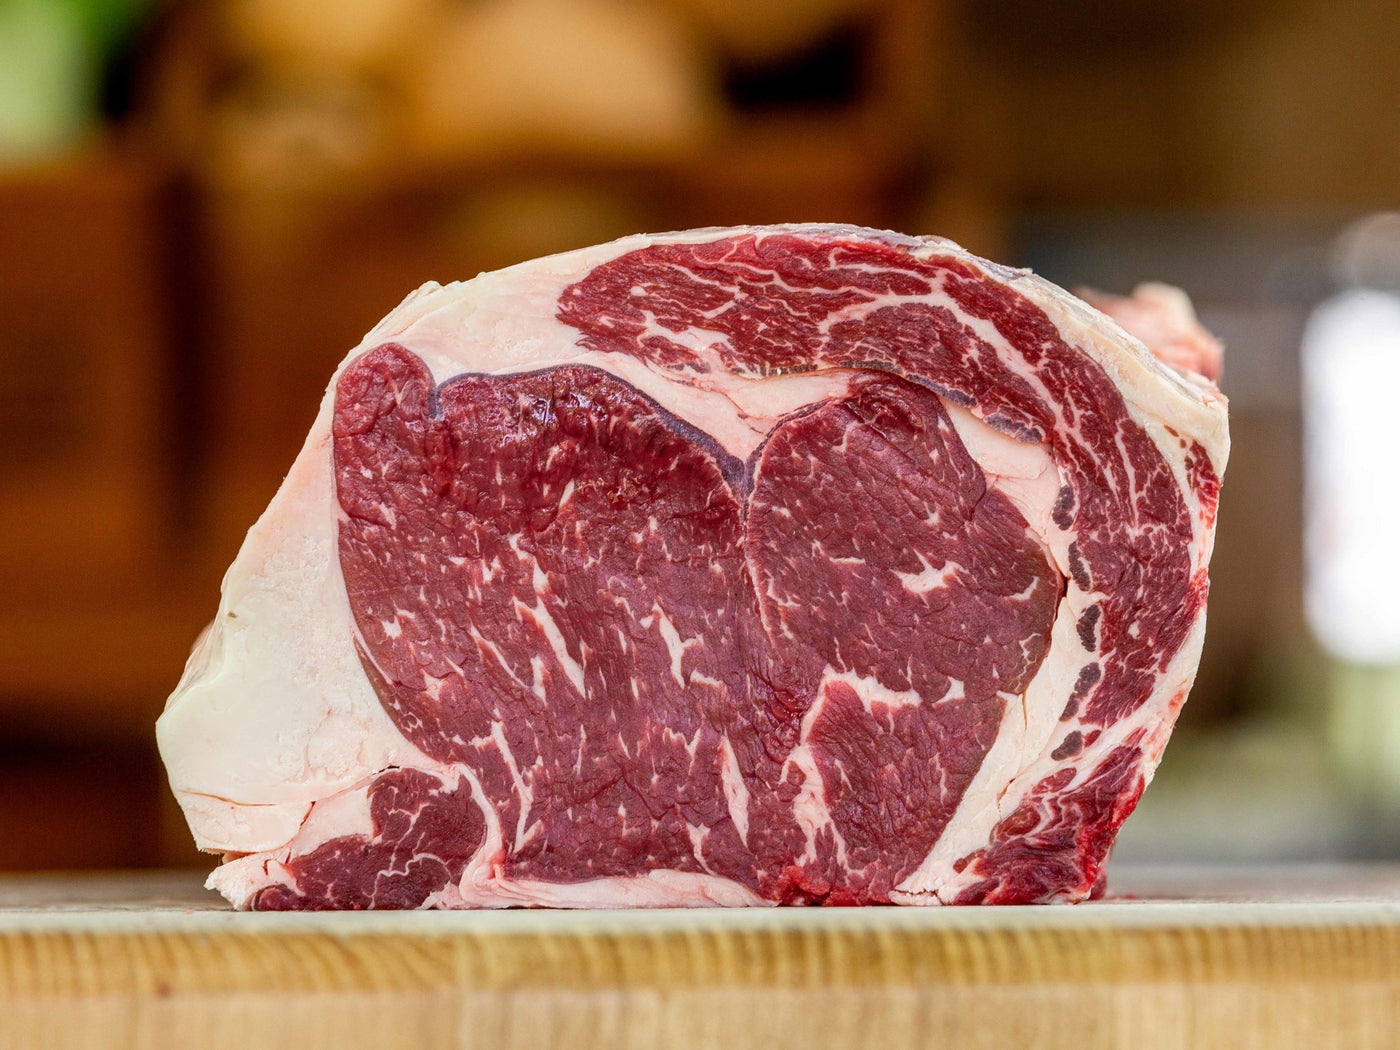 Grass Fed, Dry-Aged Ribeye Steak - 100 Day Dry-Aged - Beef - Thomas Joseph Butchery - Ethical Dry-Aged Meat The Best Steak UK Thomas Joseph Butchery